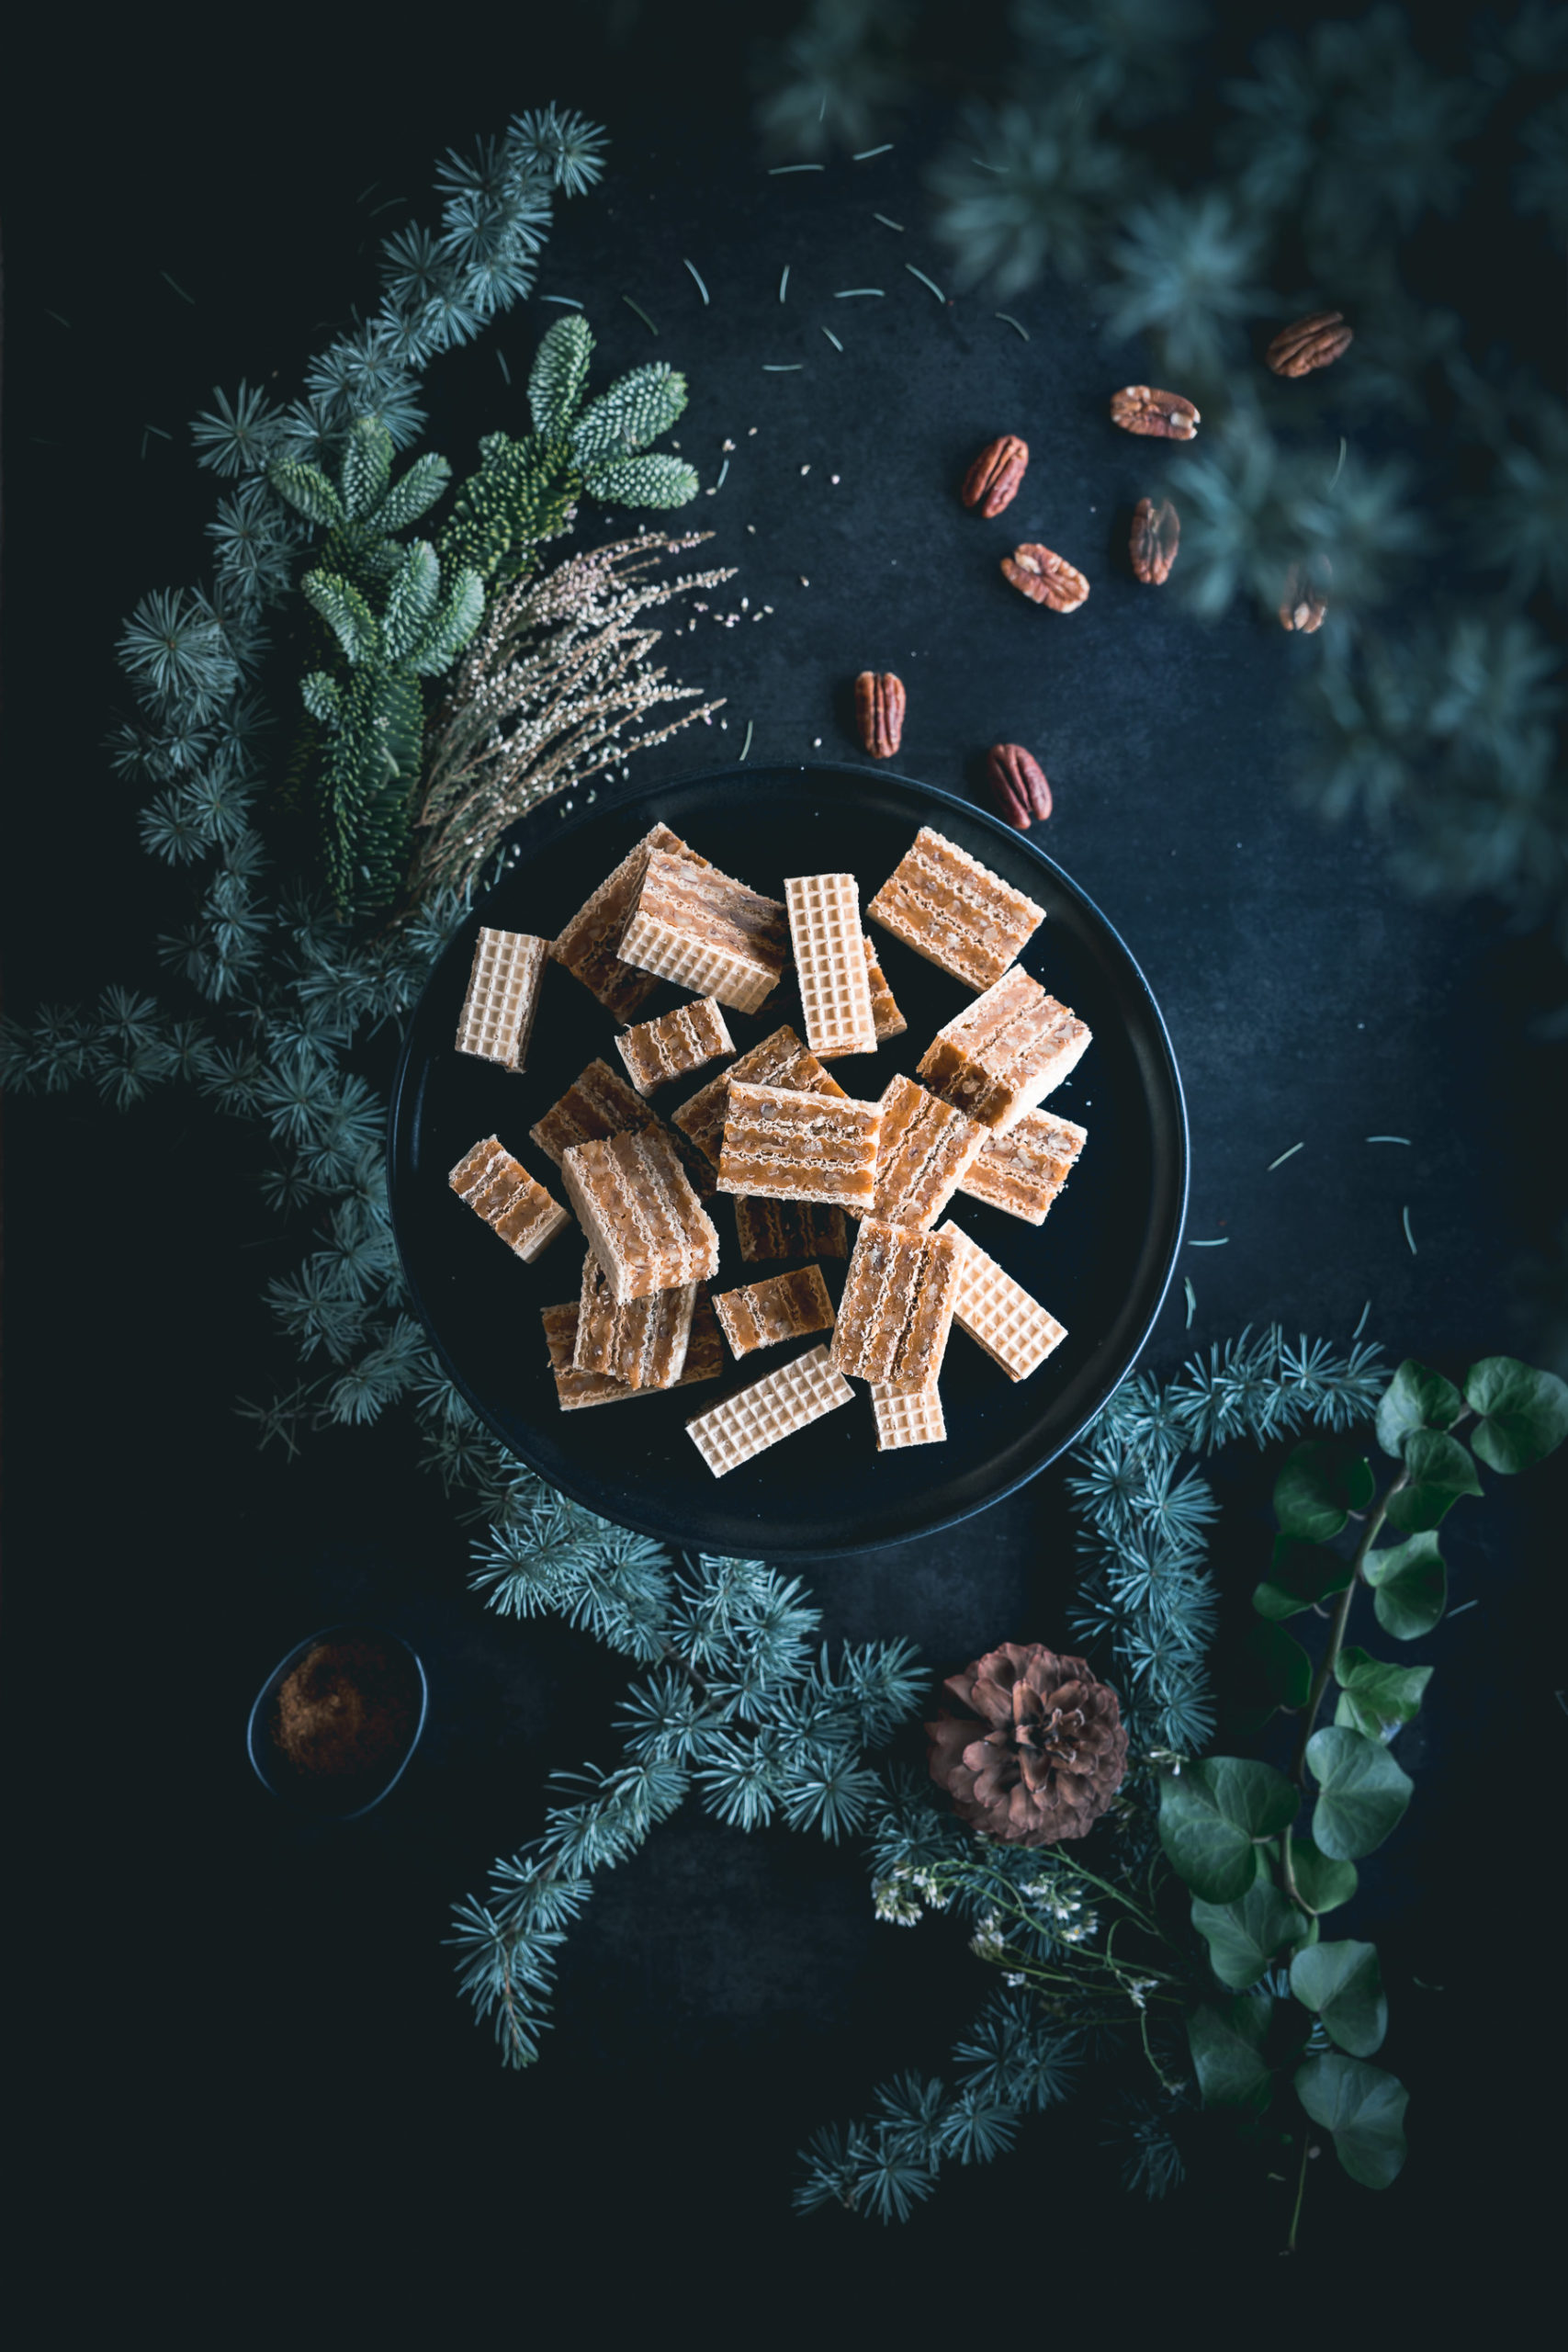 Caramel Biscuits photography by Zuzana Rainet